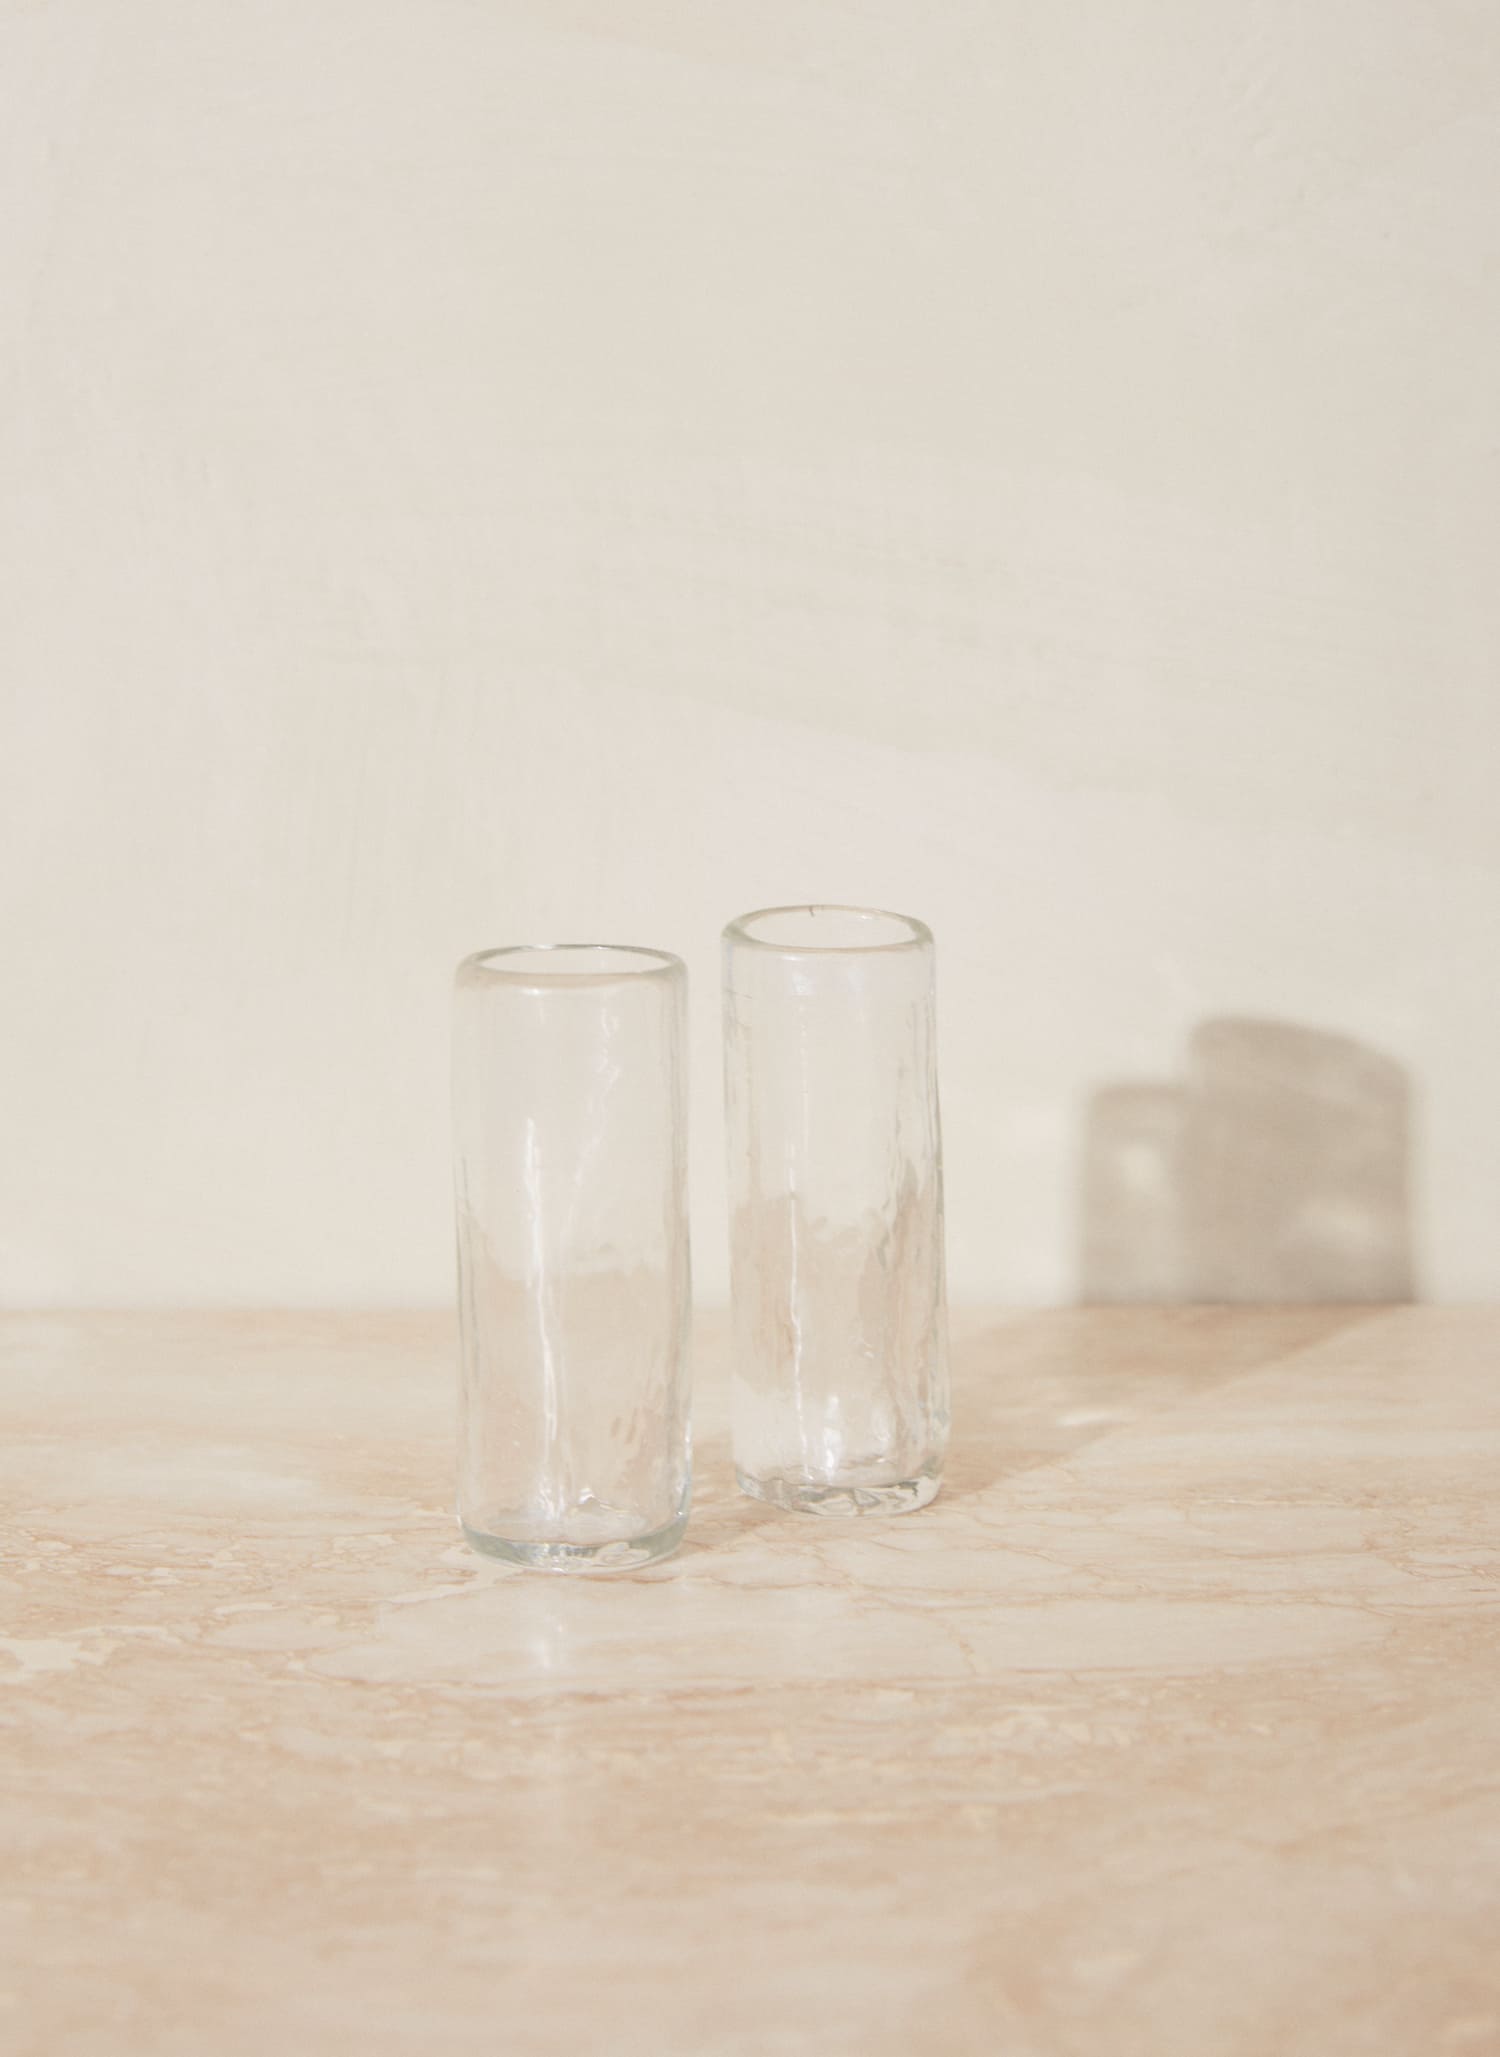 Organic Shot Glass. Tall and slim handblown shot glass designed for entertaining. Made from durable, lead-free recycled glass.